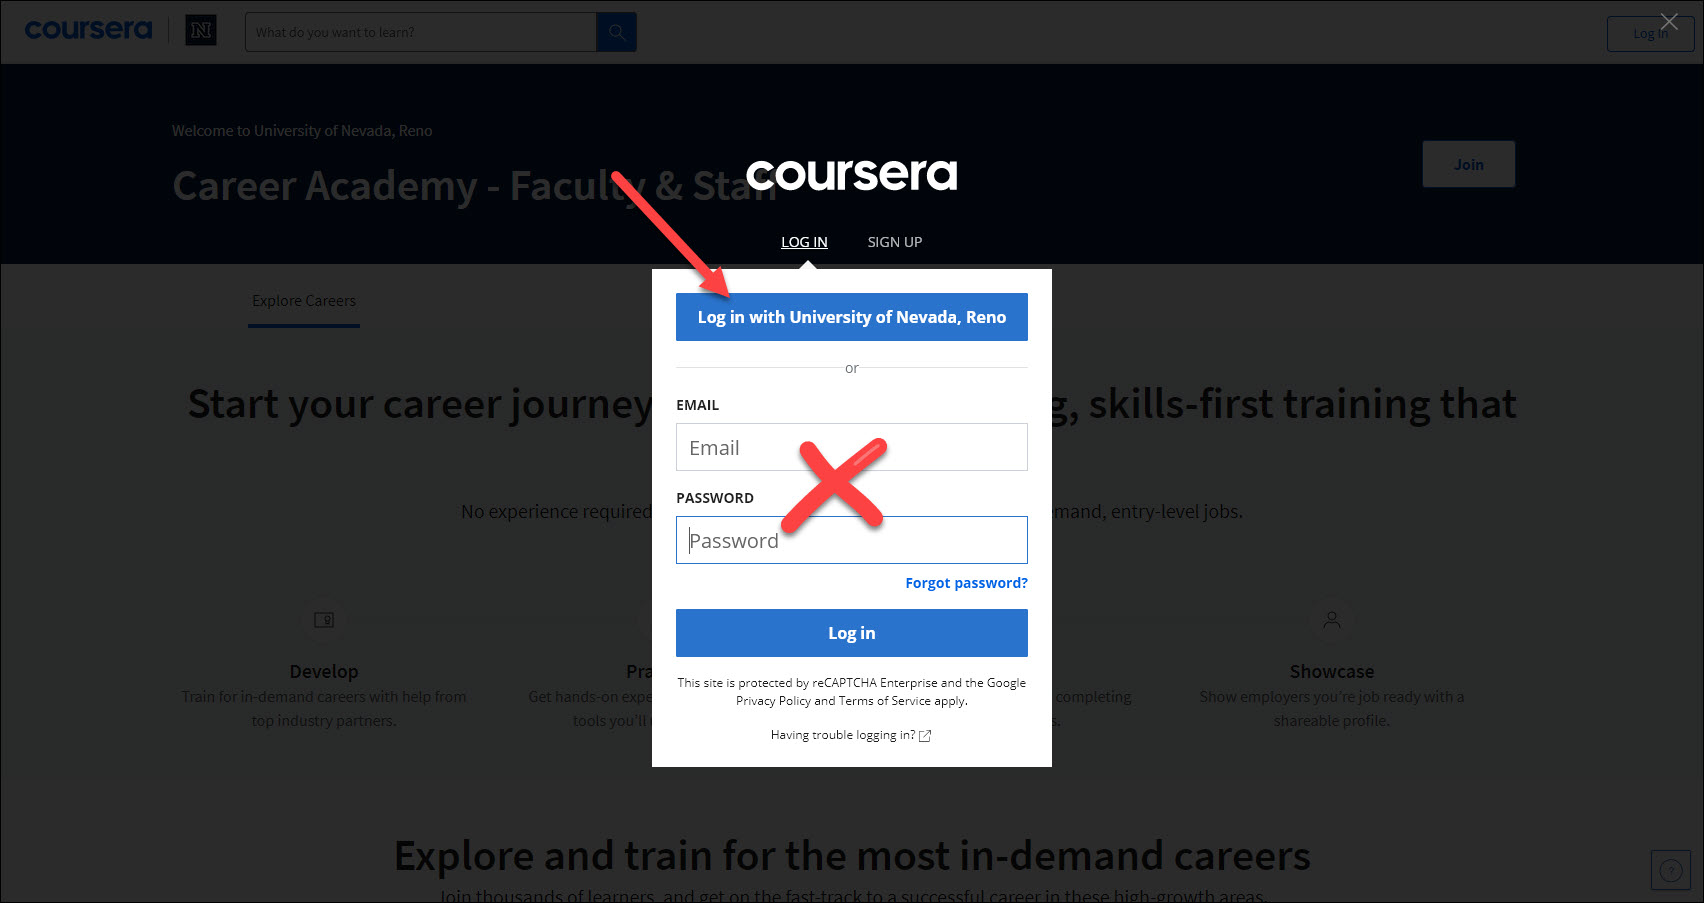 Screen shot of UNR Coursera Career Academy – Faculty & Staff login screen. An arrow highlights the “Log in with University of Nevada, Reno” button. An “X” is marking out the email and password fields.